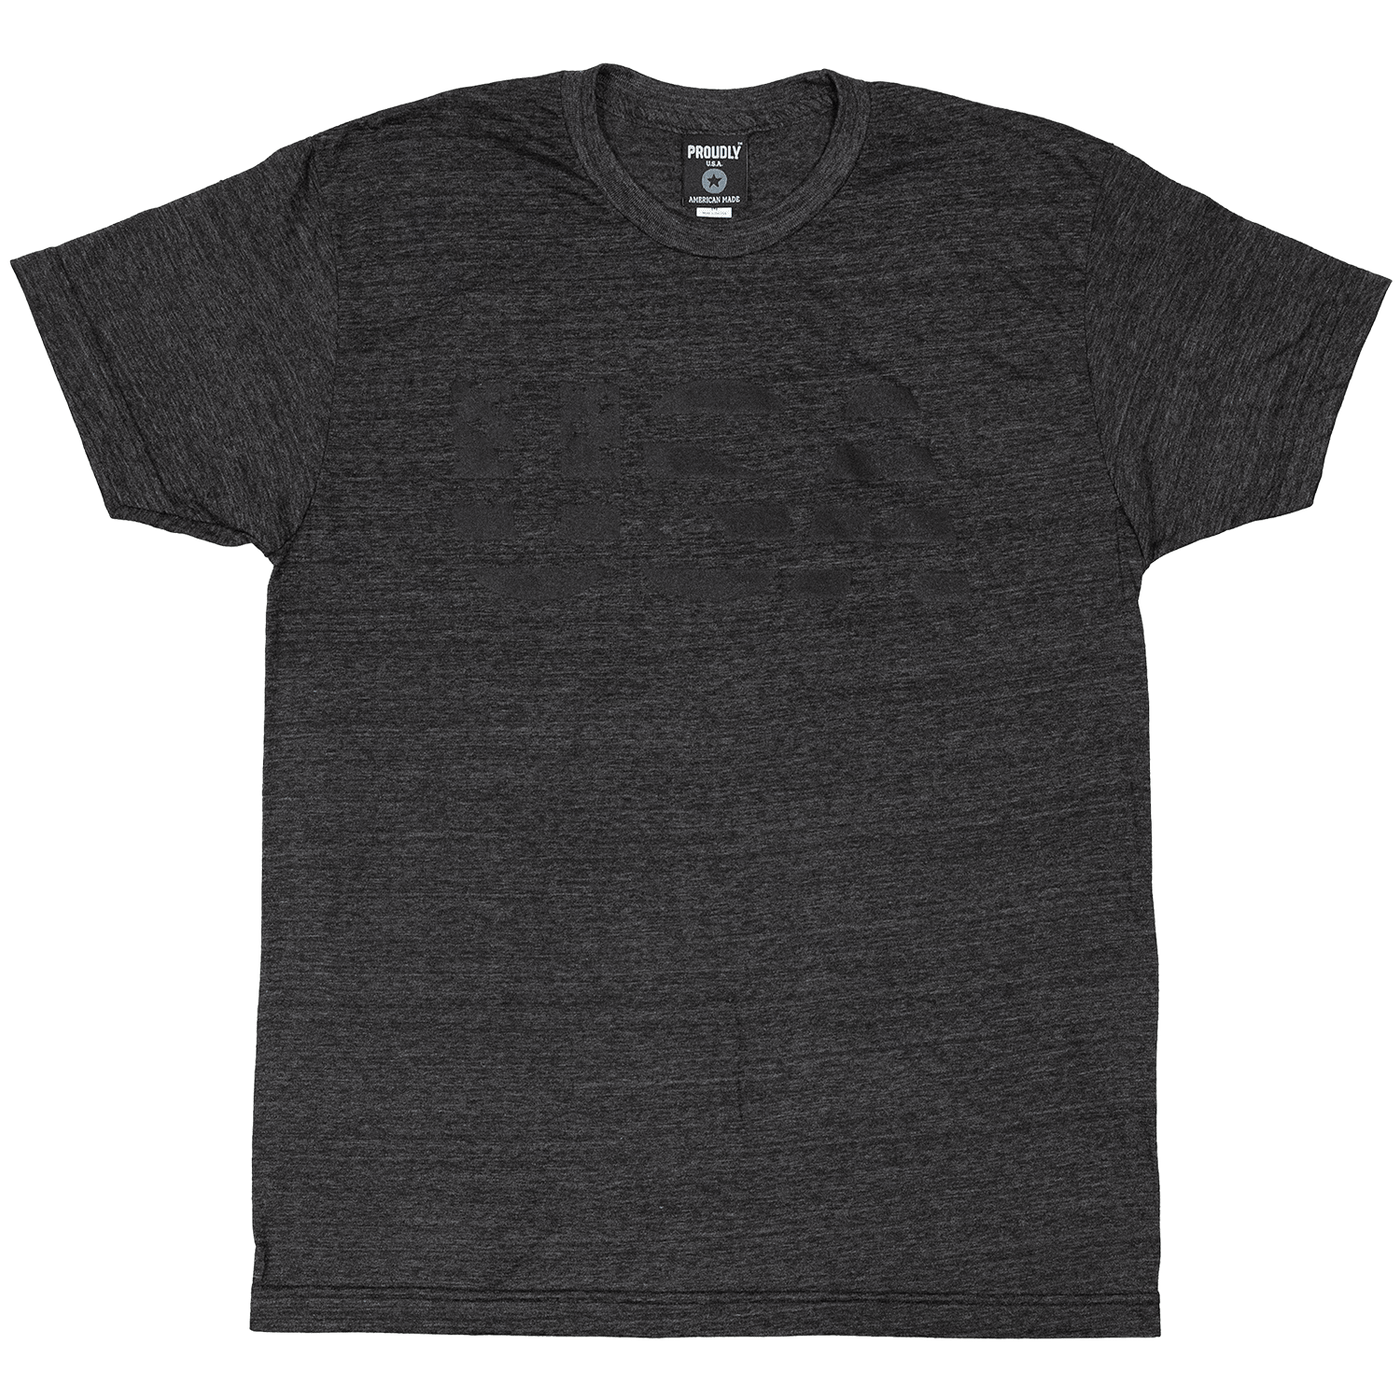 Heather charcoal tri-blend t-shirt with subtle black-on-charcoal USA graphic on chest